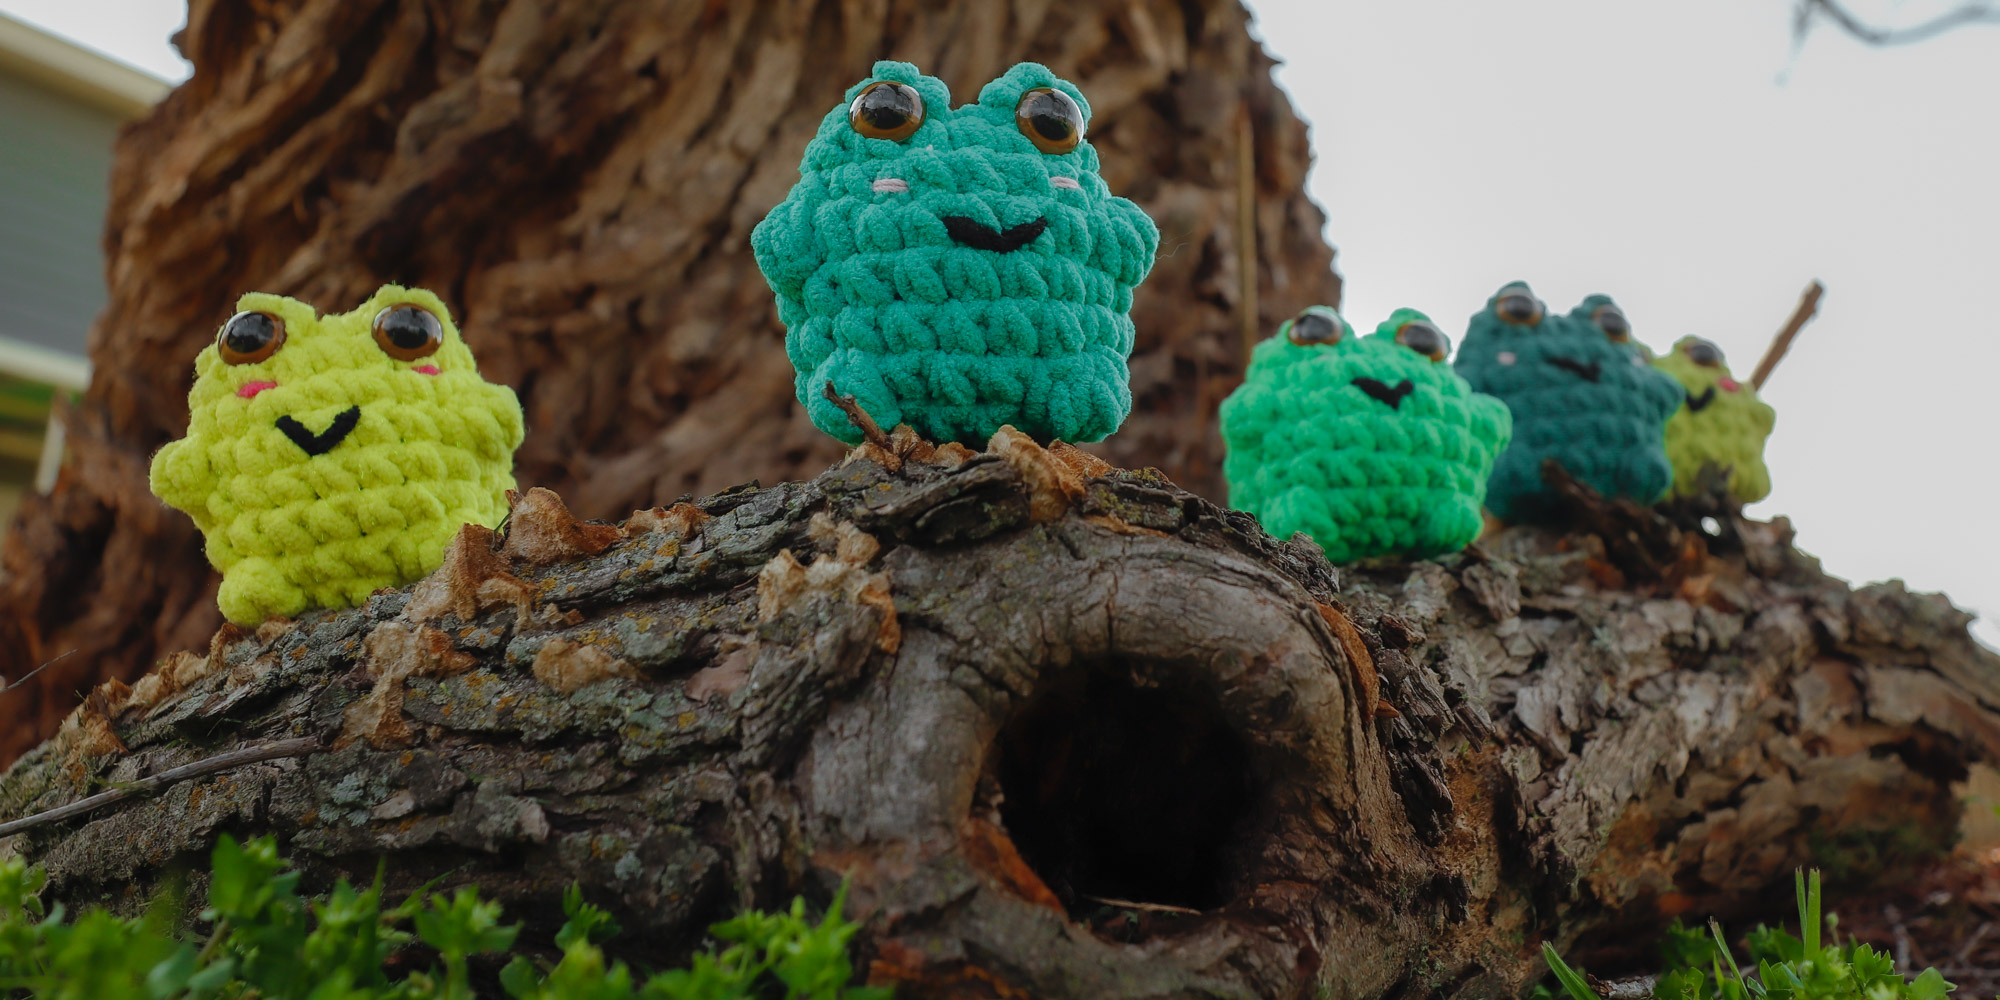 A new line of bump-textured frogs is the perfect showcase on top of an old fallen log. The rough texture of the log is reflected in the unique texture of the frogs, yet the detail captured of the frogs hints at how this texture is somehow also soft and squeezable.